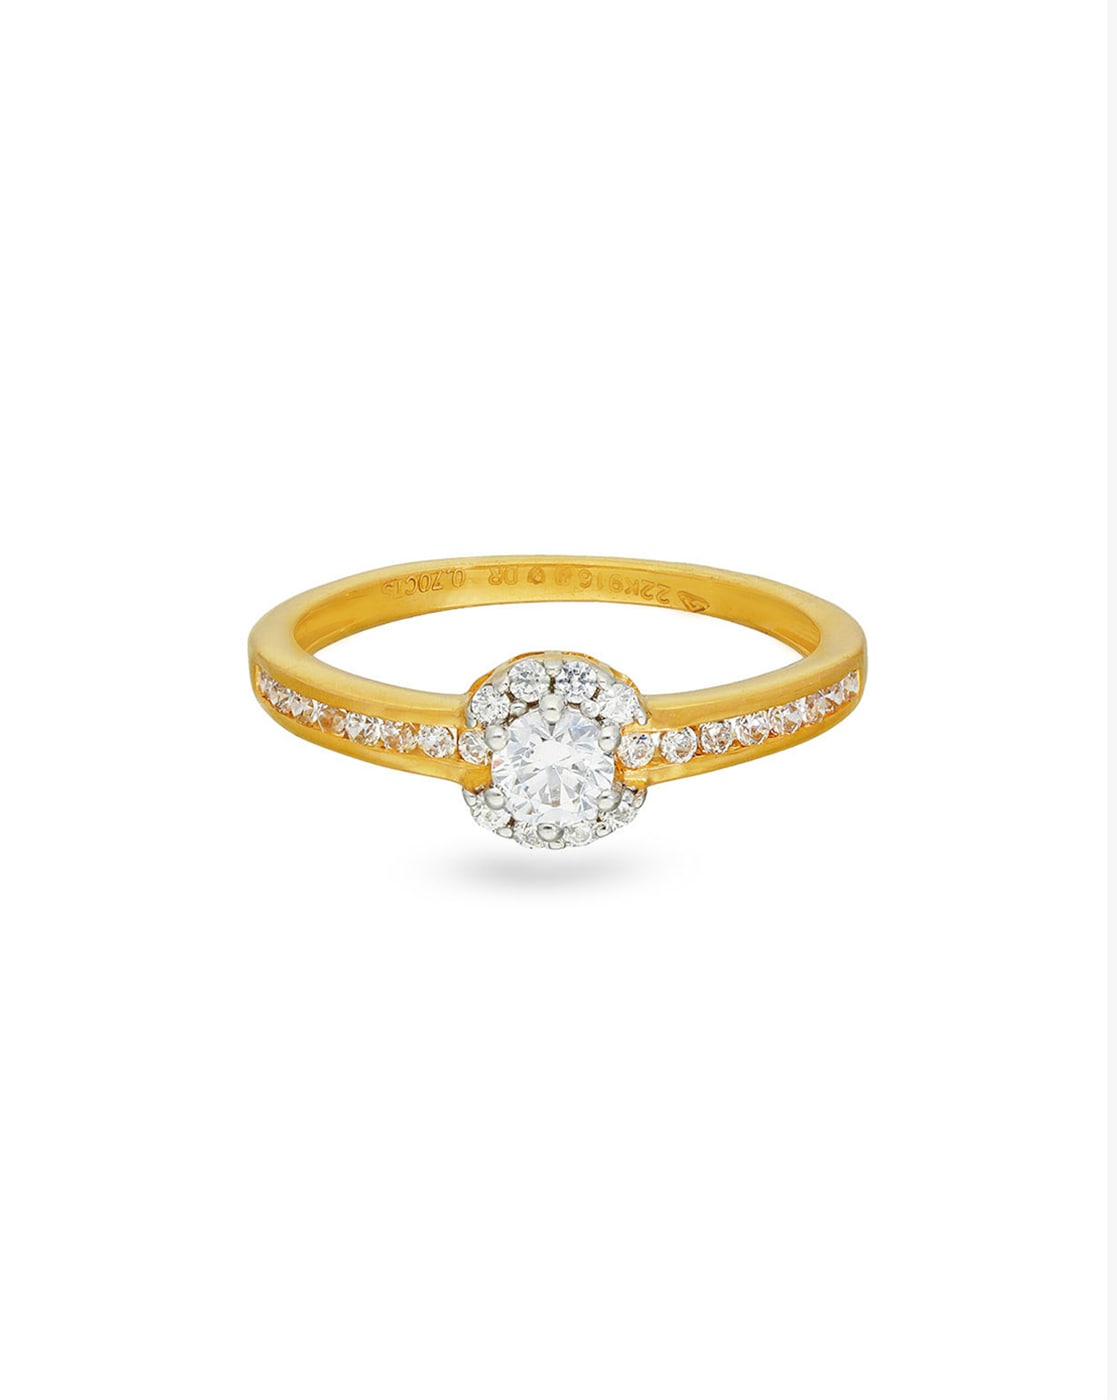 Gold ladies ring with white stone 22k purity, weight 2.700gm Approx  (genuine size) – Asdelo